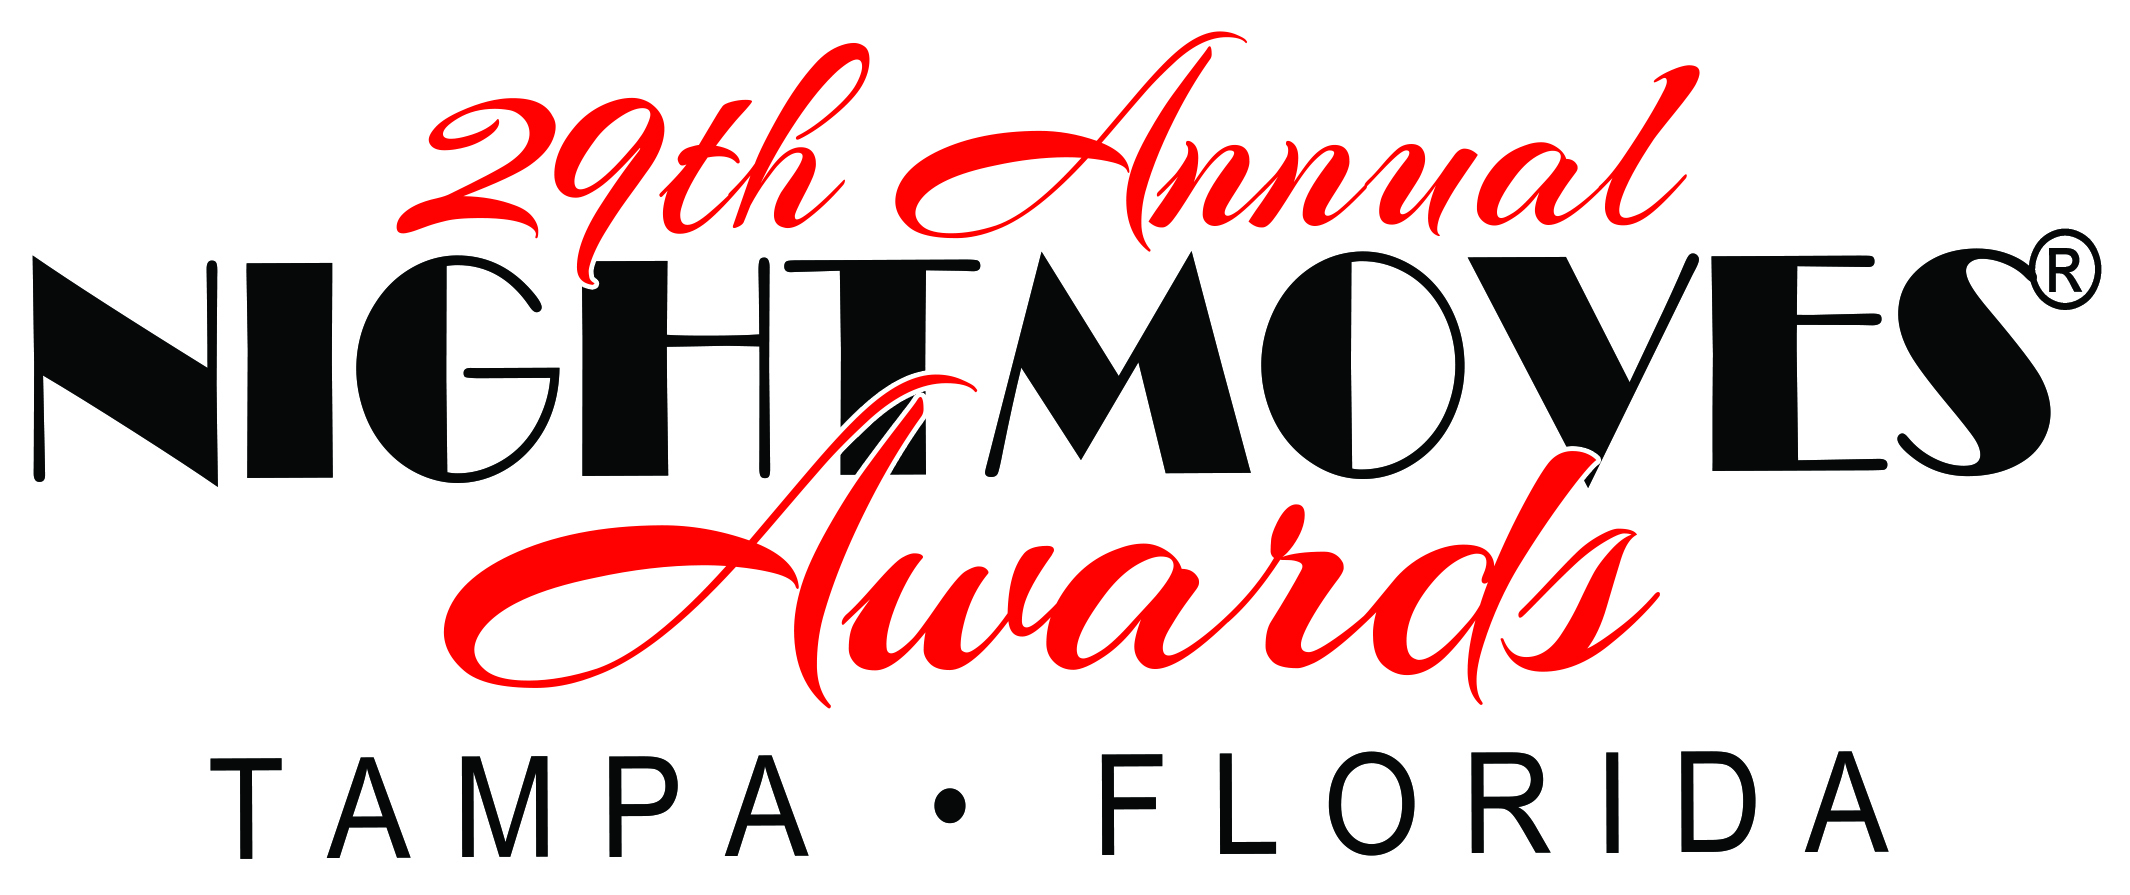 The 29th Annual NightMoves® Awards Weekend Takes Place October 7-11, 2021, In Tampa, Fl!